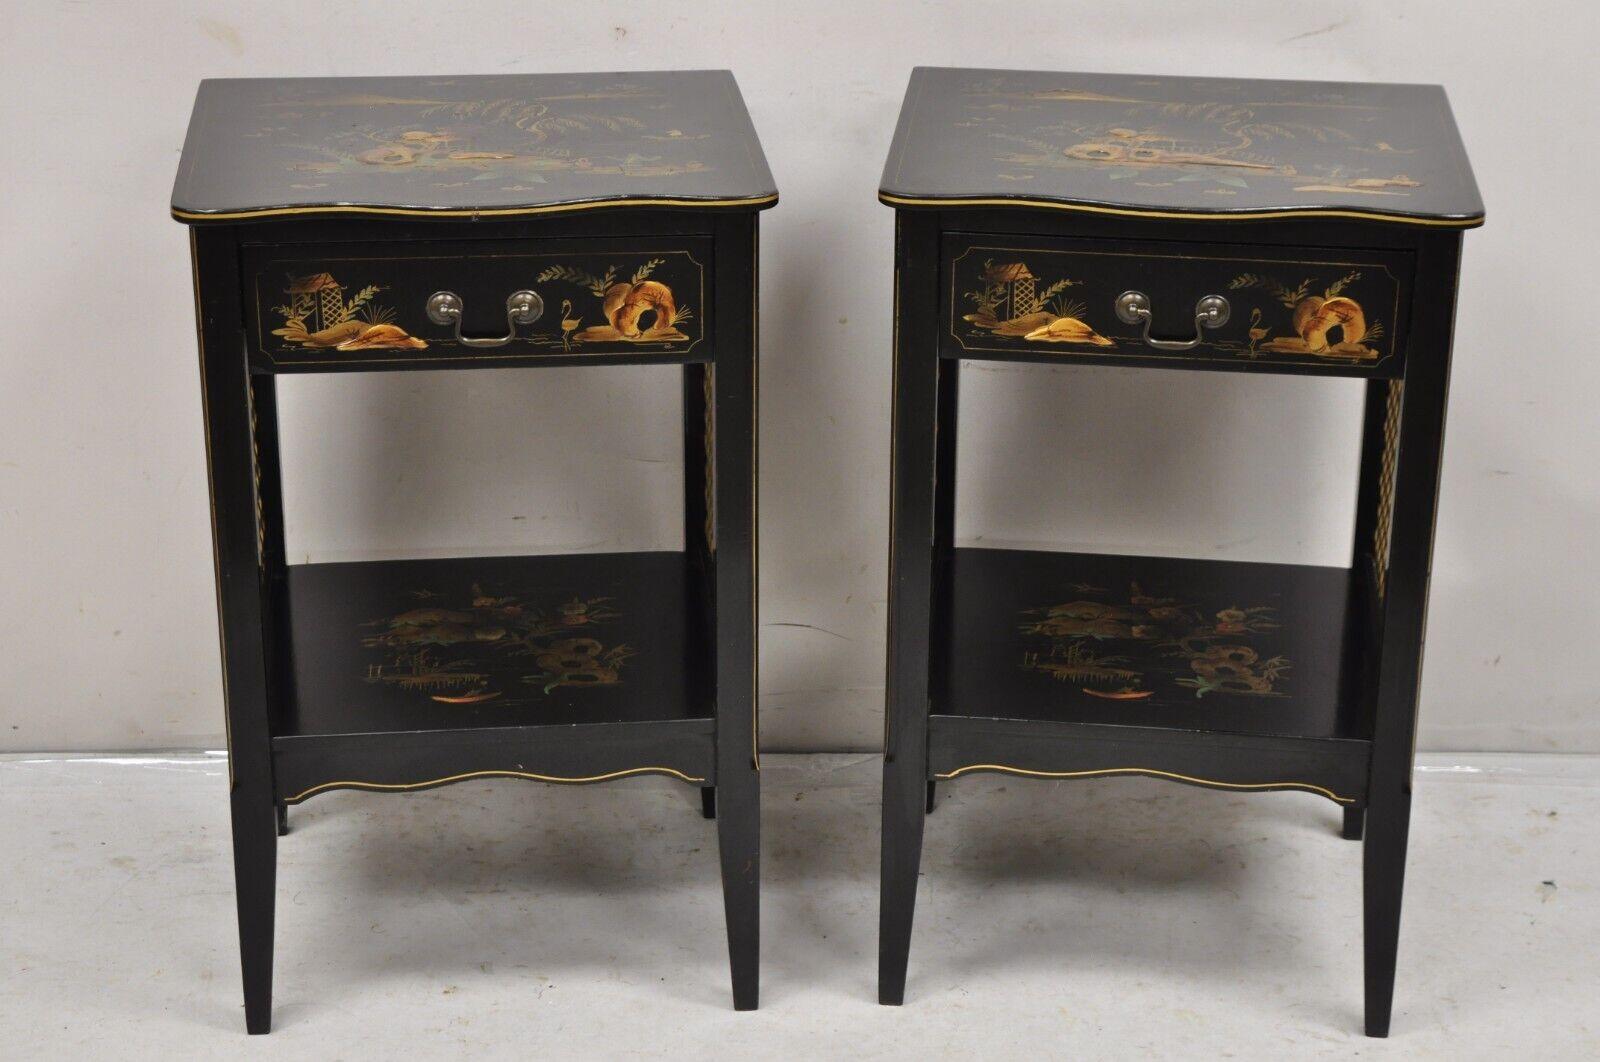 Pair of Vintage Katherine Henick Chinoiserie Chinese Black Hand Painted Nightstands with Metal Lattice Sides and One Dovetailed Drawer Each. Circa Mid 20th Century. Measurements: 29